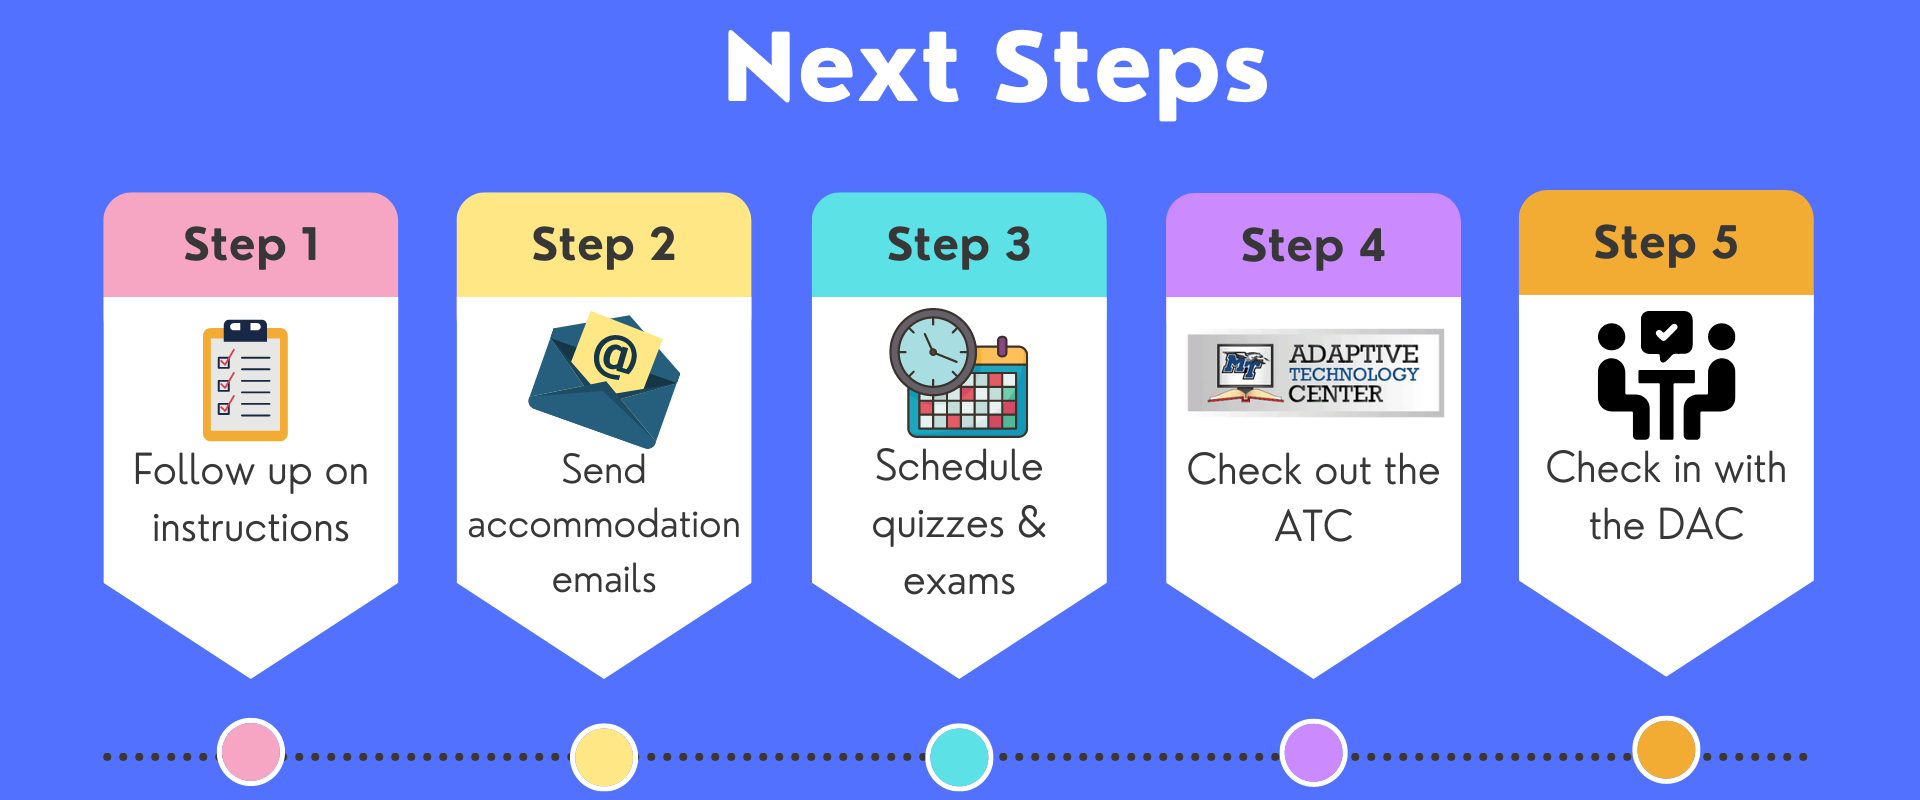 DAC Next Steps infographic, with images to represent each step. Full text and additional details are available below.